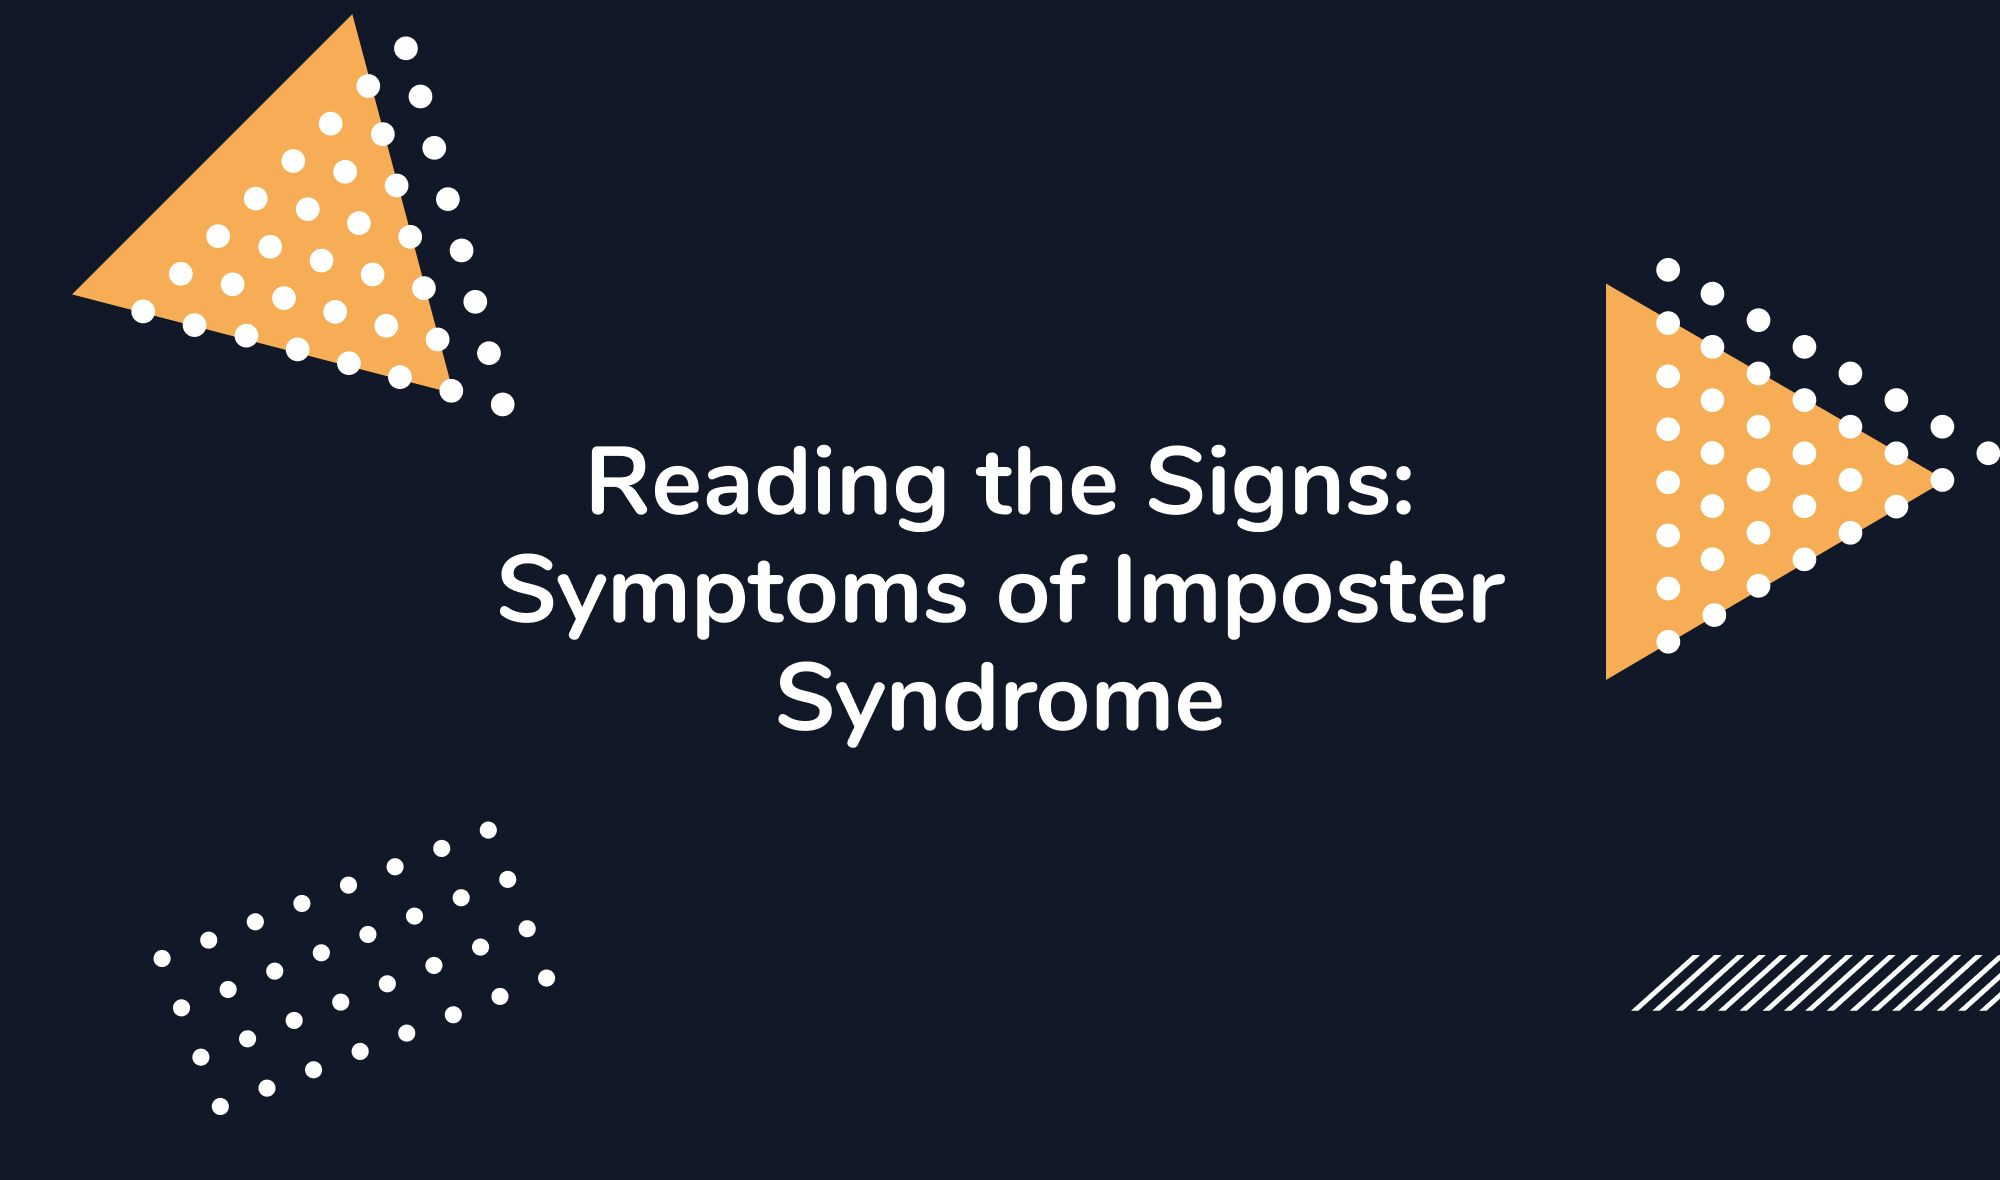 Reading the Signs: Symptoms of Imposter Syndrome